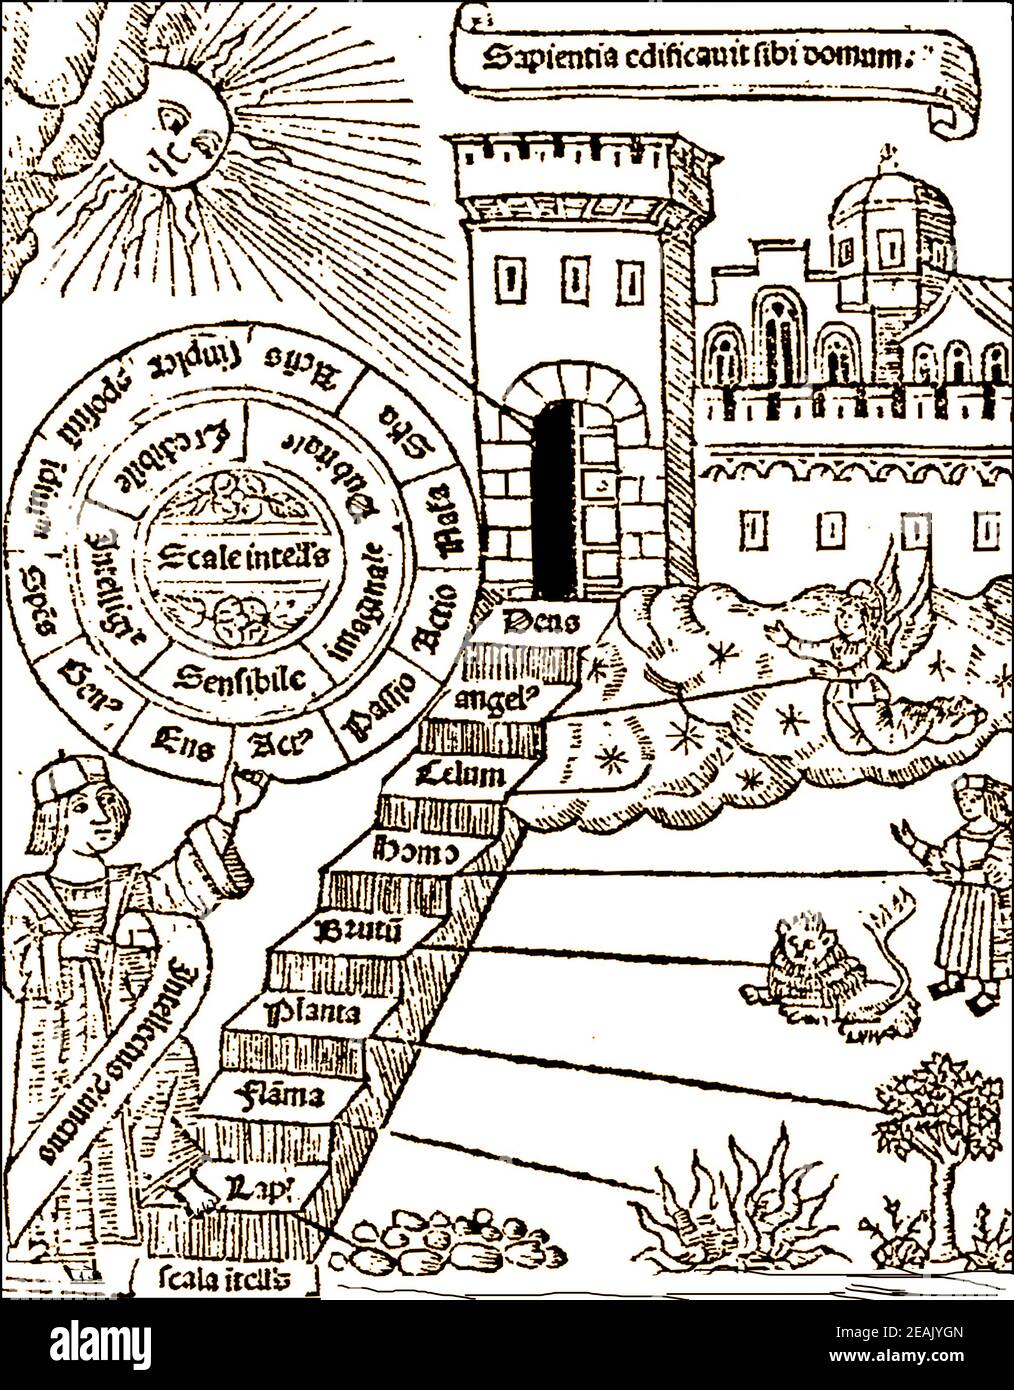 A 16th Century magical or alchemical woodcut full of occult meanings. It shows the scale of mortal existence in the form of steps representing stone or earth, flames,plants, animals,man,sky or heaven, angels and god. At the top of the steps is the house of God (built of wisdom) Stock Photo